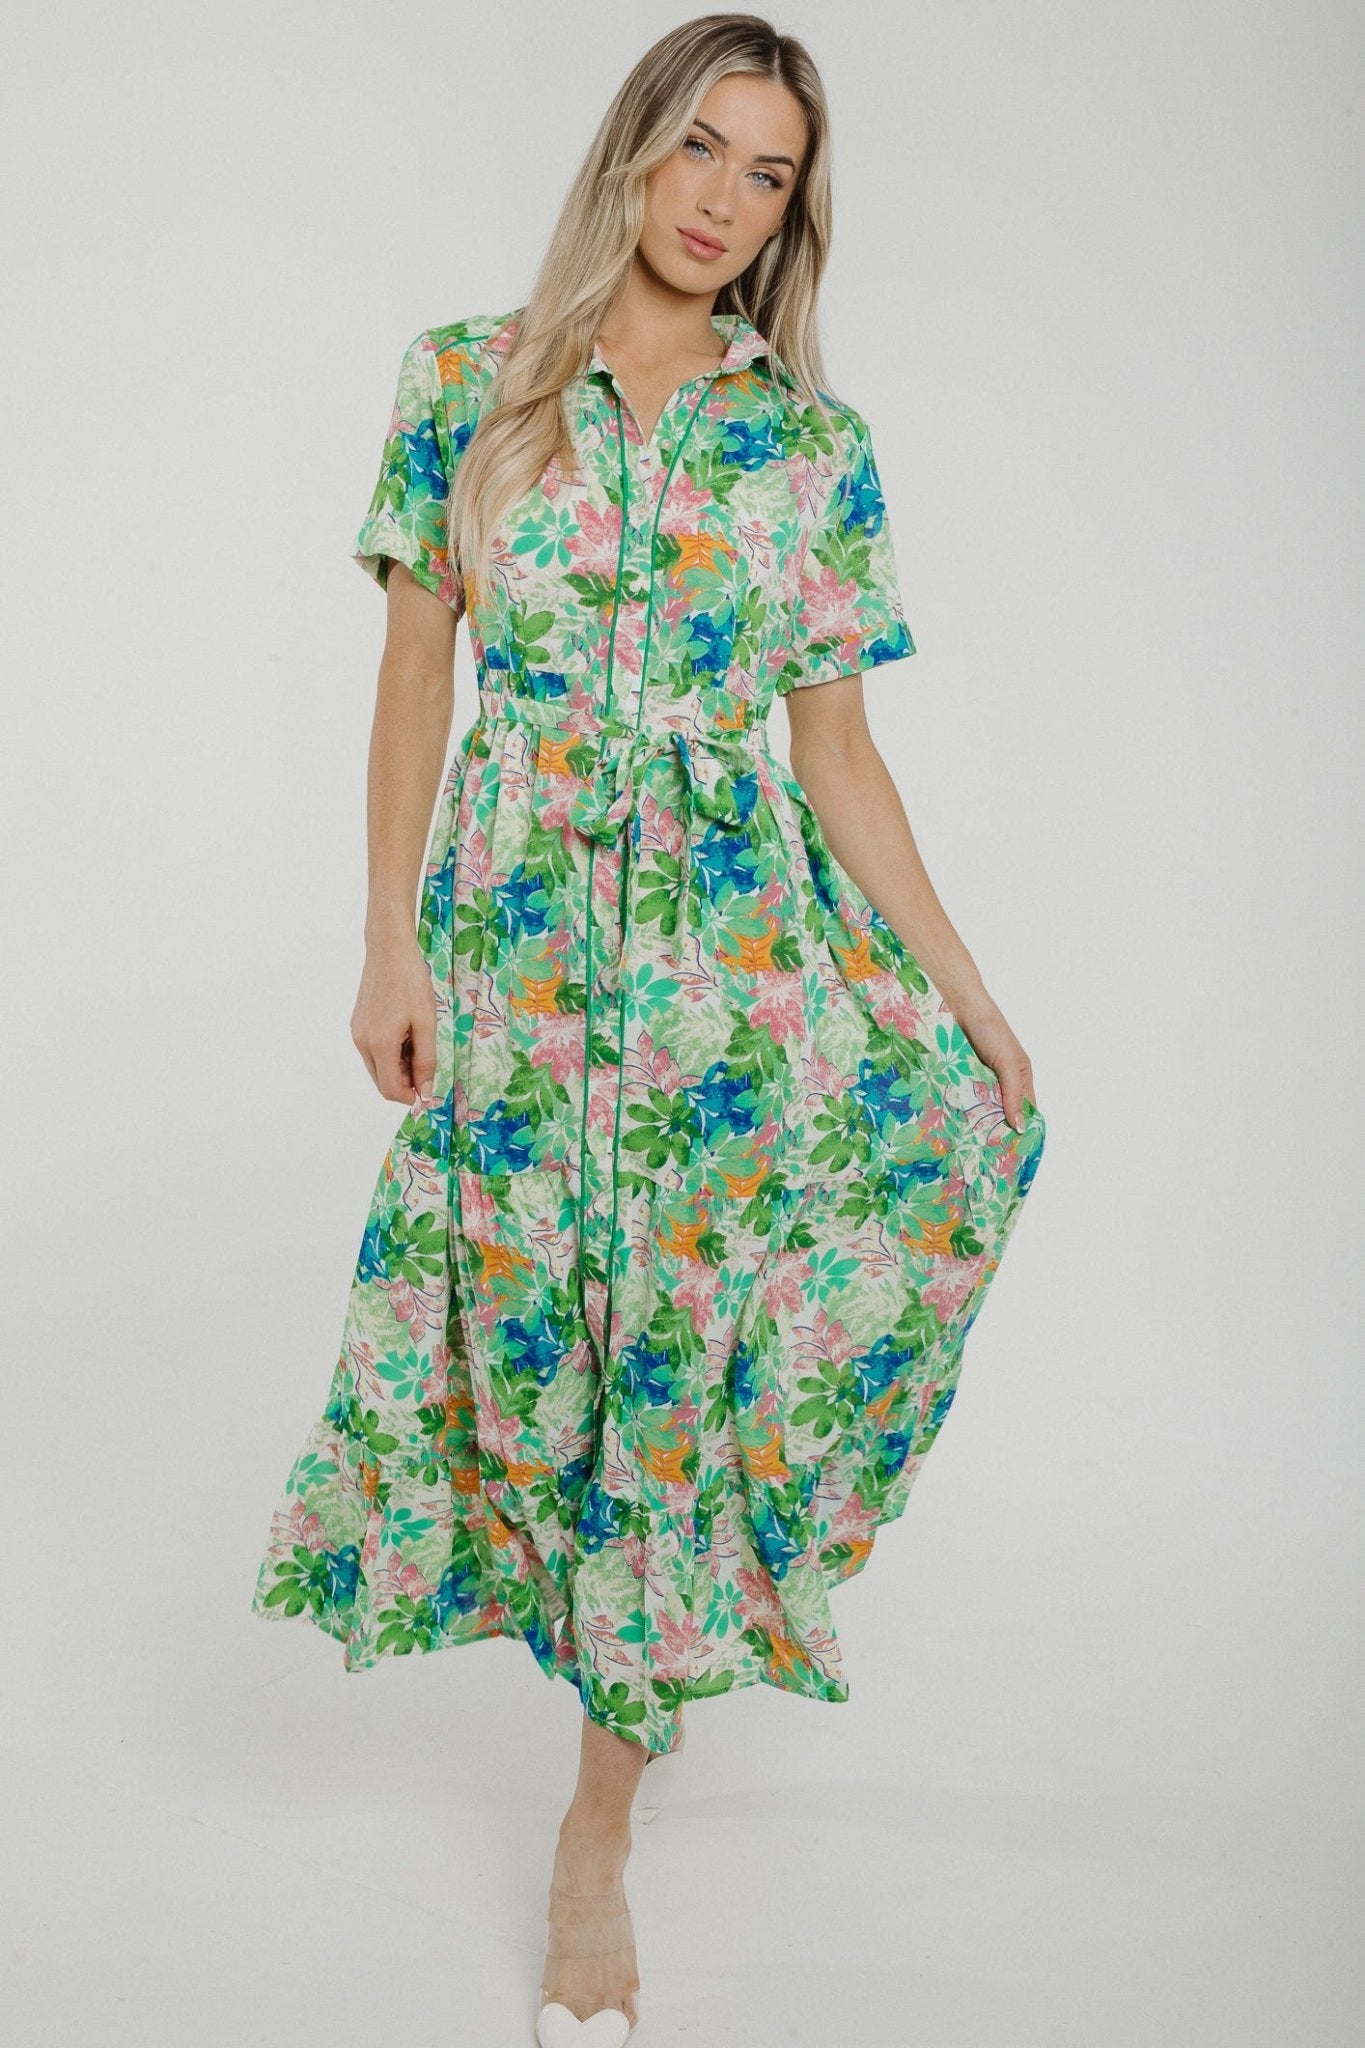 Polly Printed Shirt Dress In Green Floral - The Walk in Wardrobe